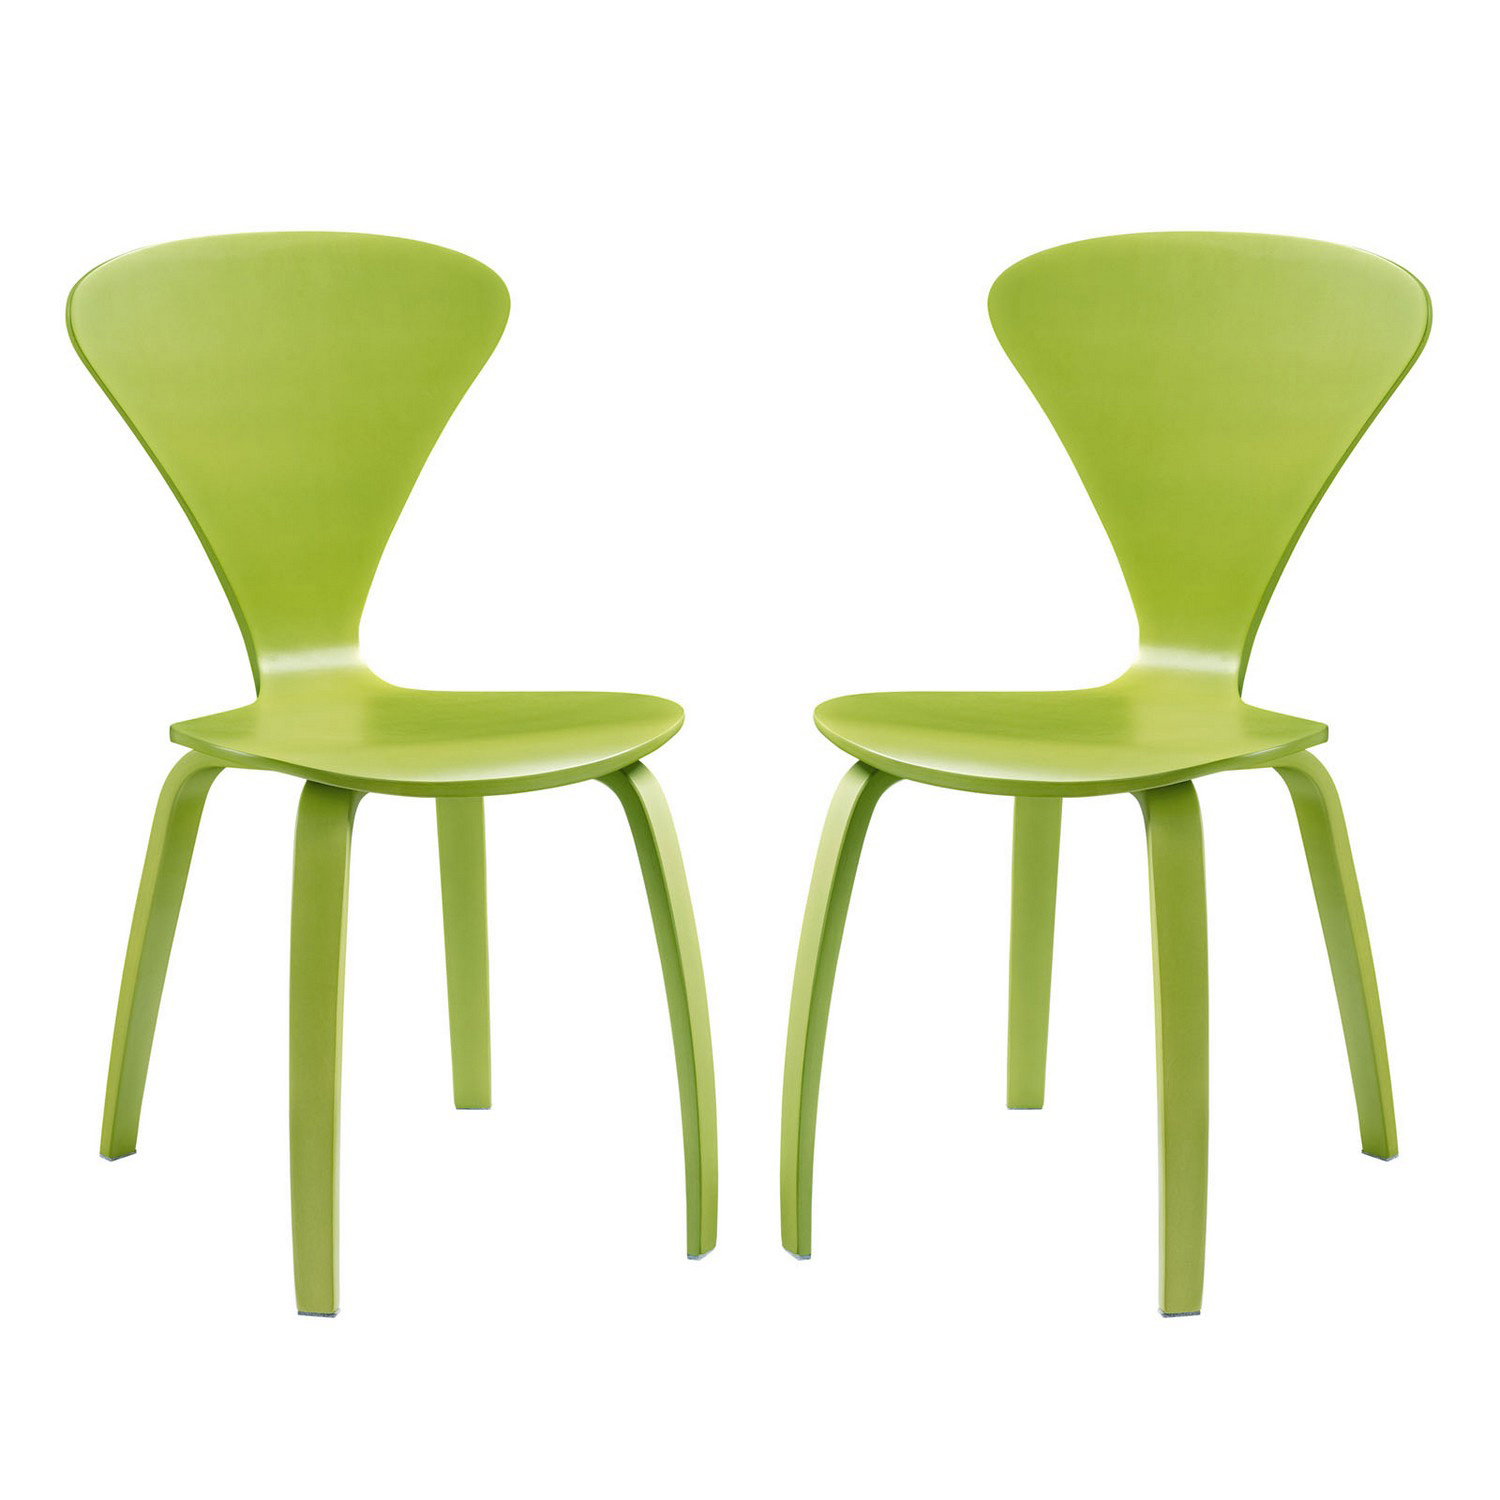 Modway Vortex Dining Chairs Set of 2 - Green